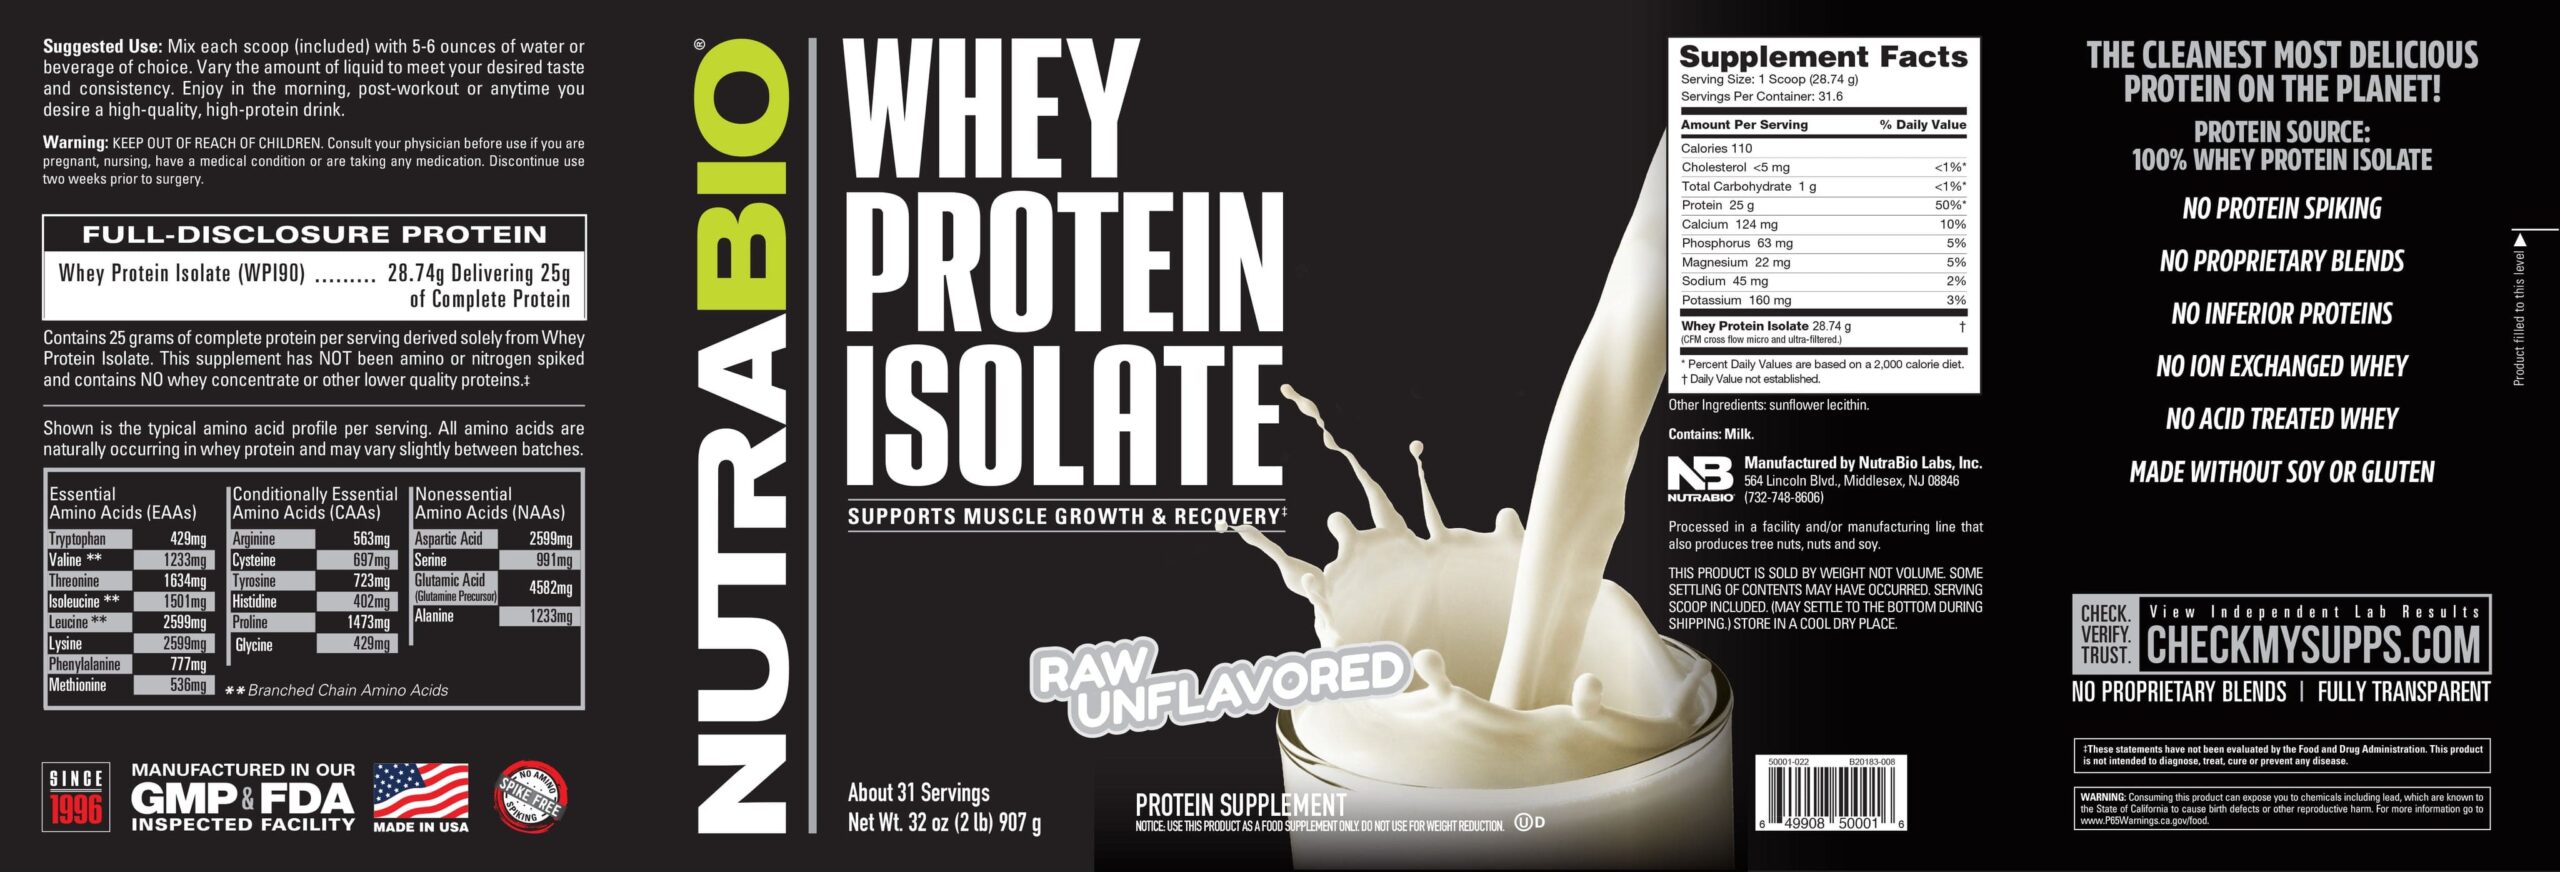 Whey-Protein-Unflavored-detail-en-scaled-1.jpg